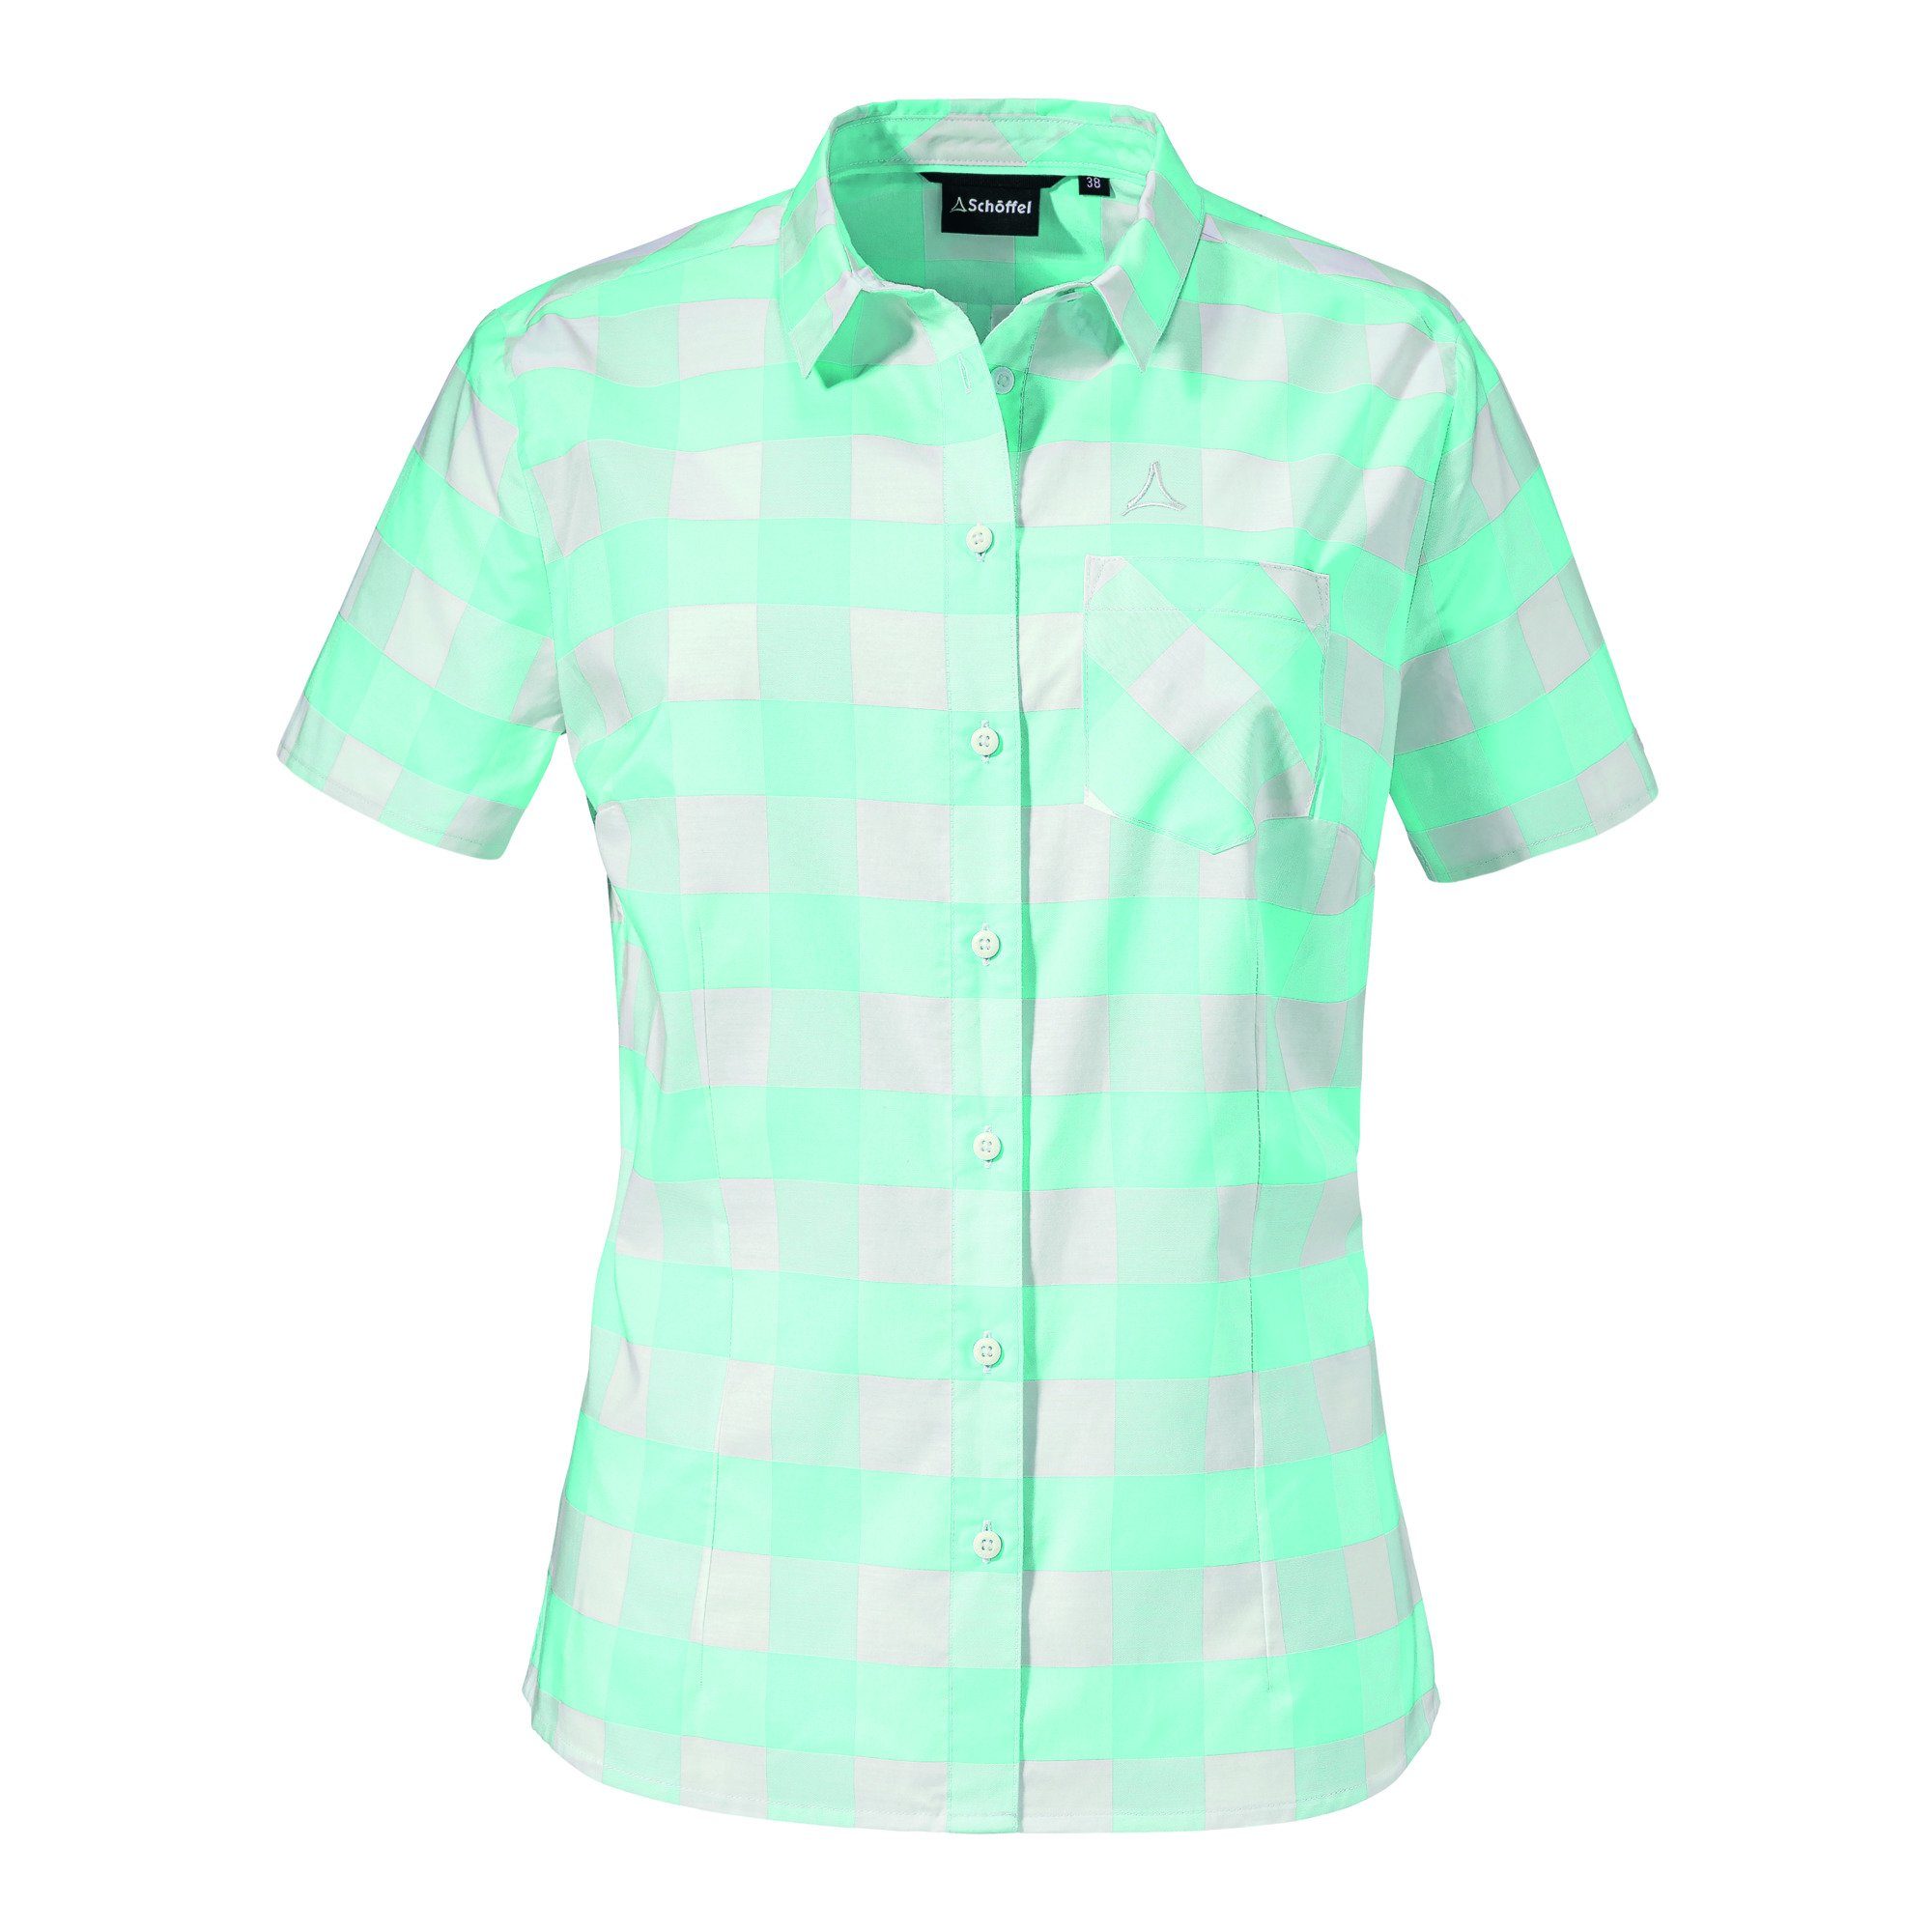 Outdoorbluse L Schöffel Moraans SH Blouse clearwater